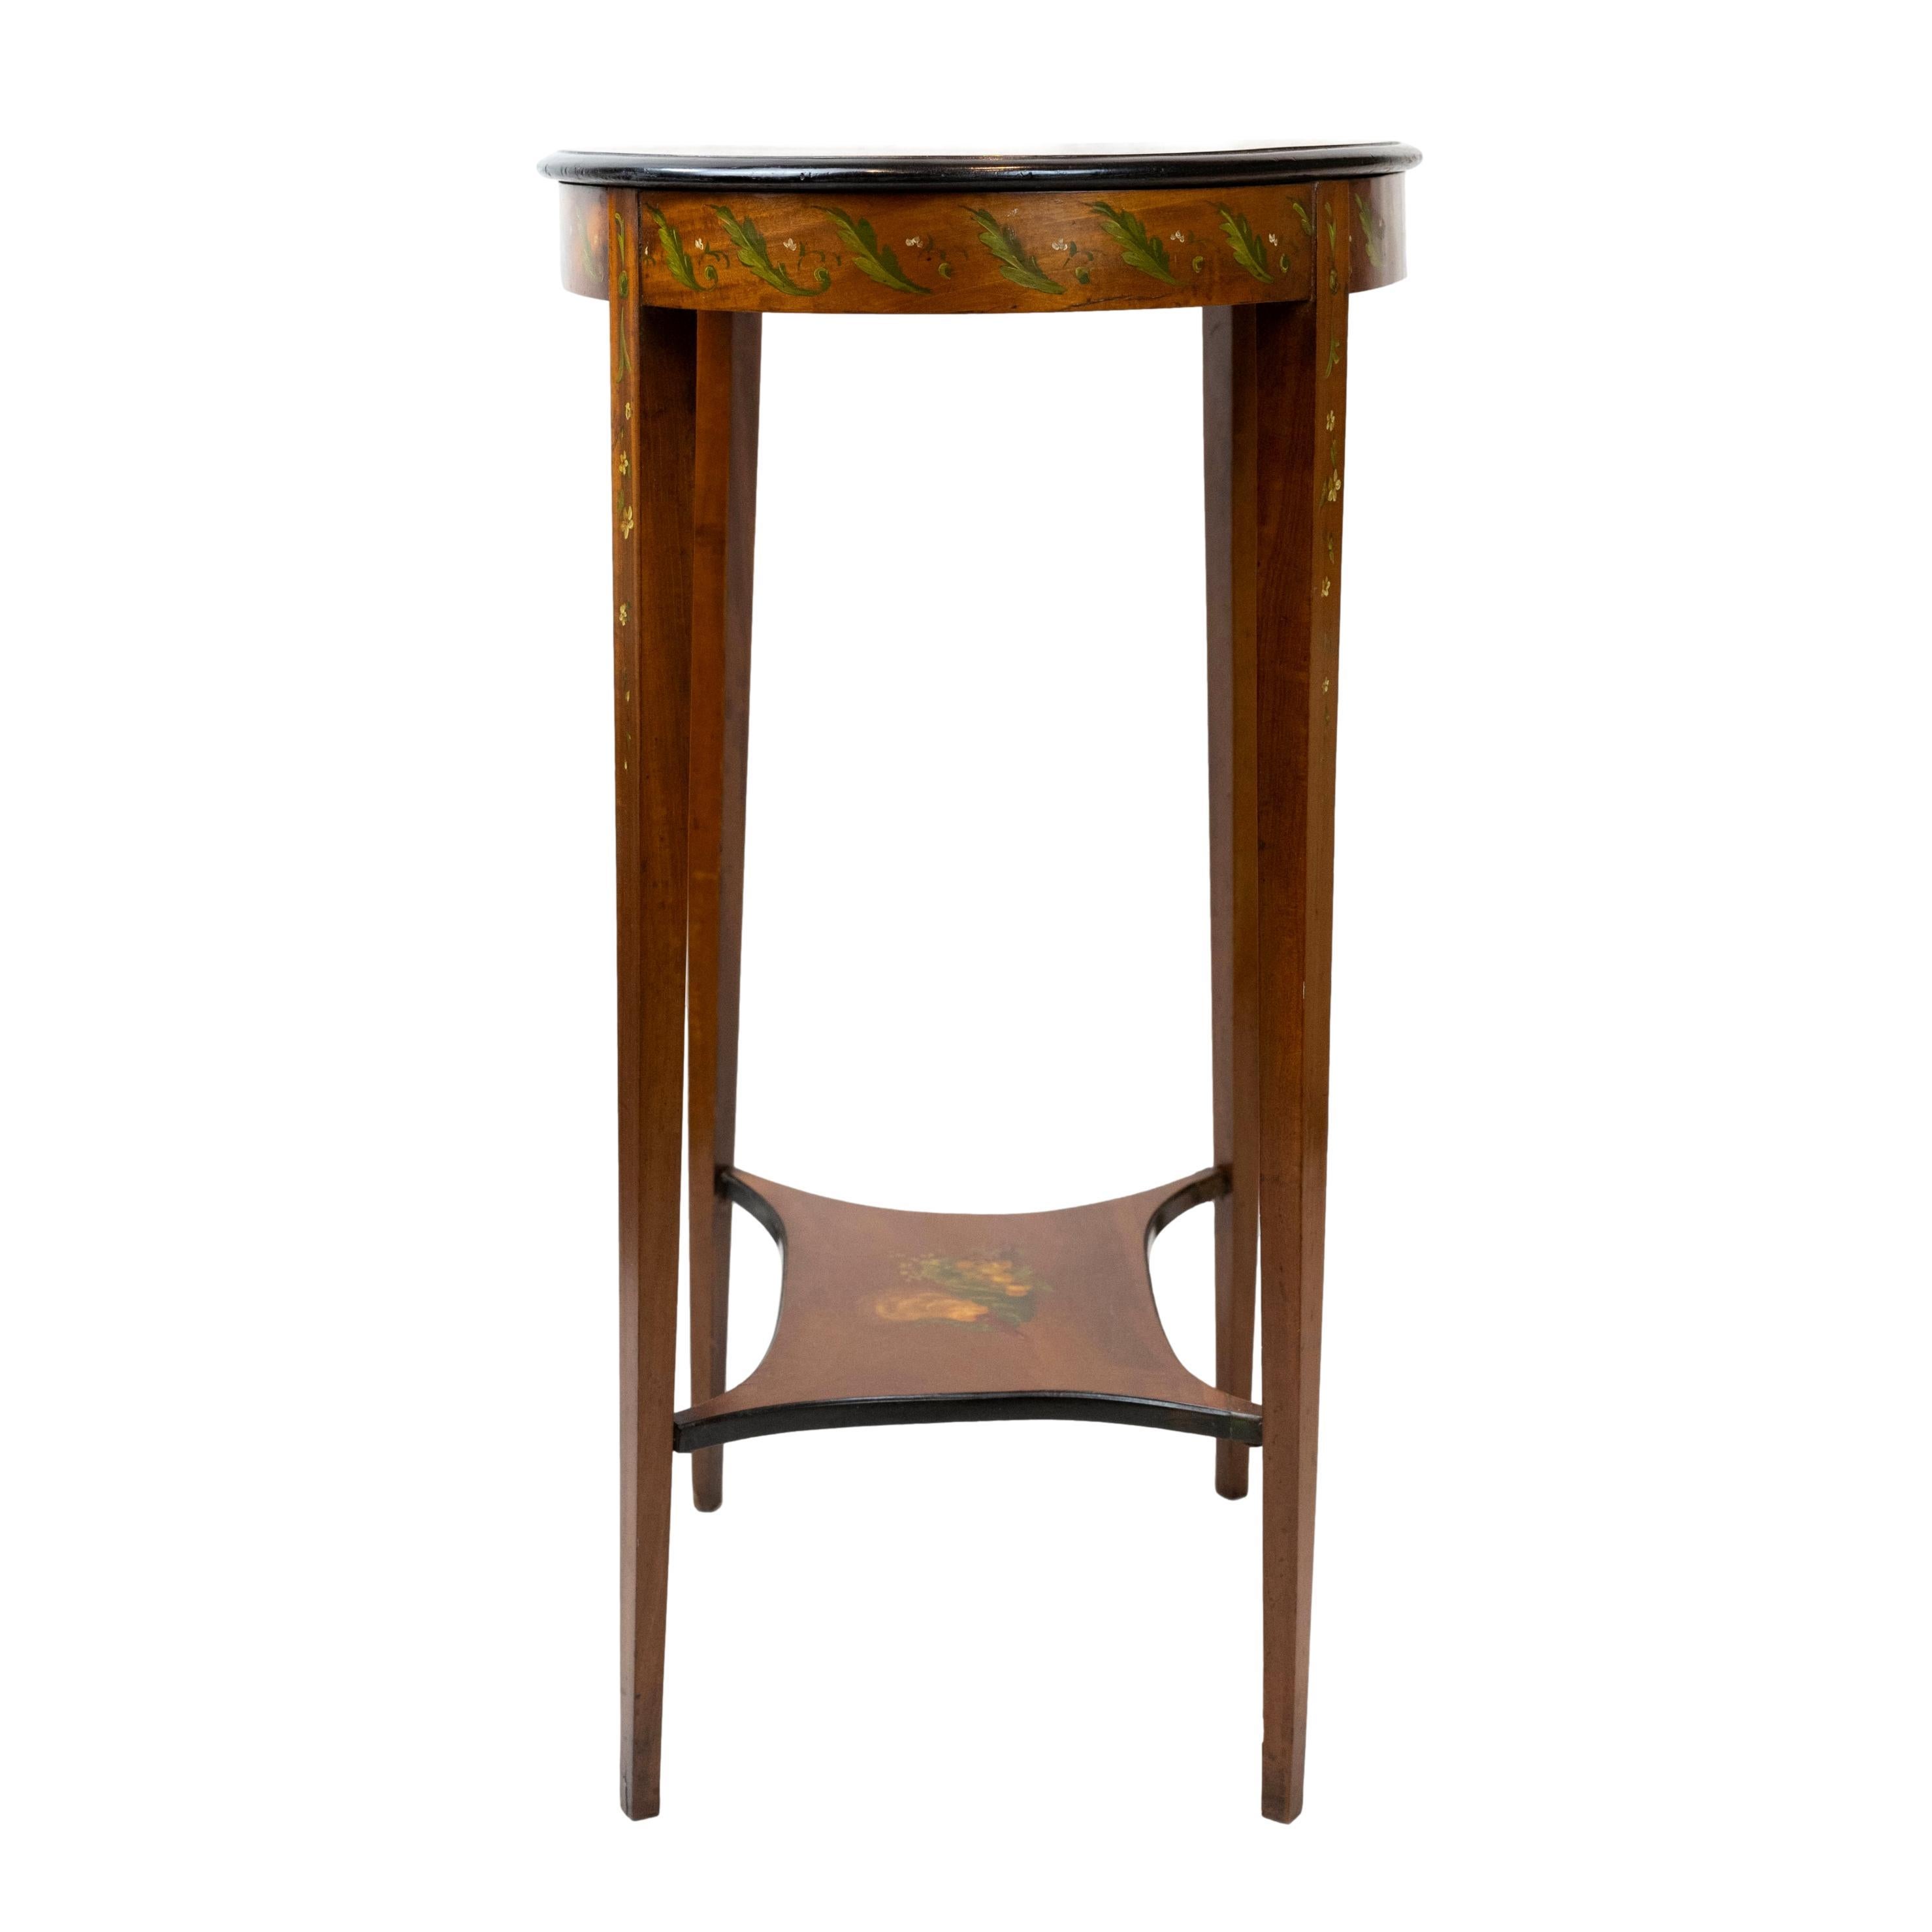 20th Century Edwardian Painted Satinwood Two-Tier Occasional Table, English, ca. 1900 For Sale